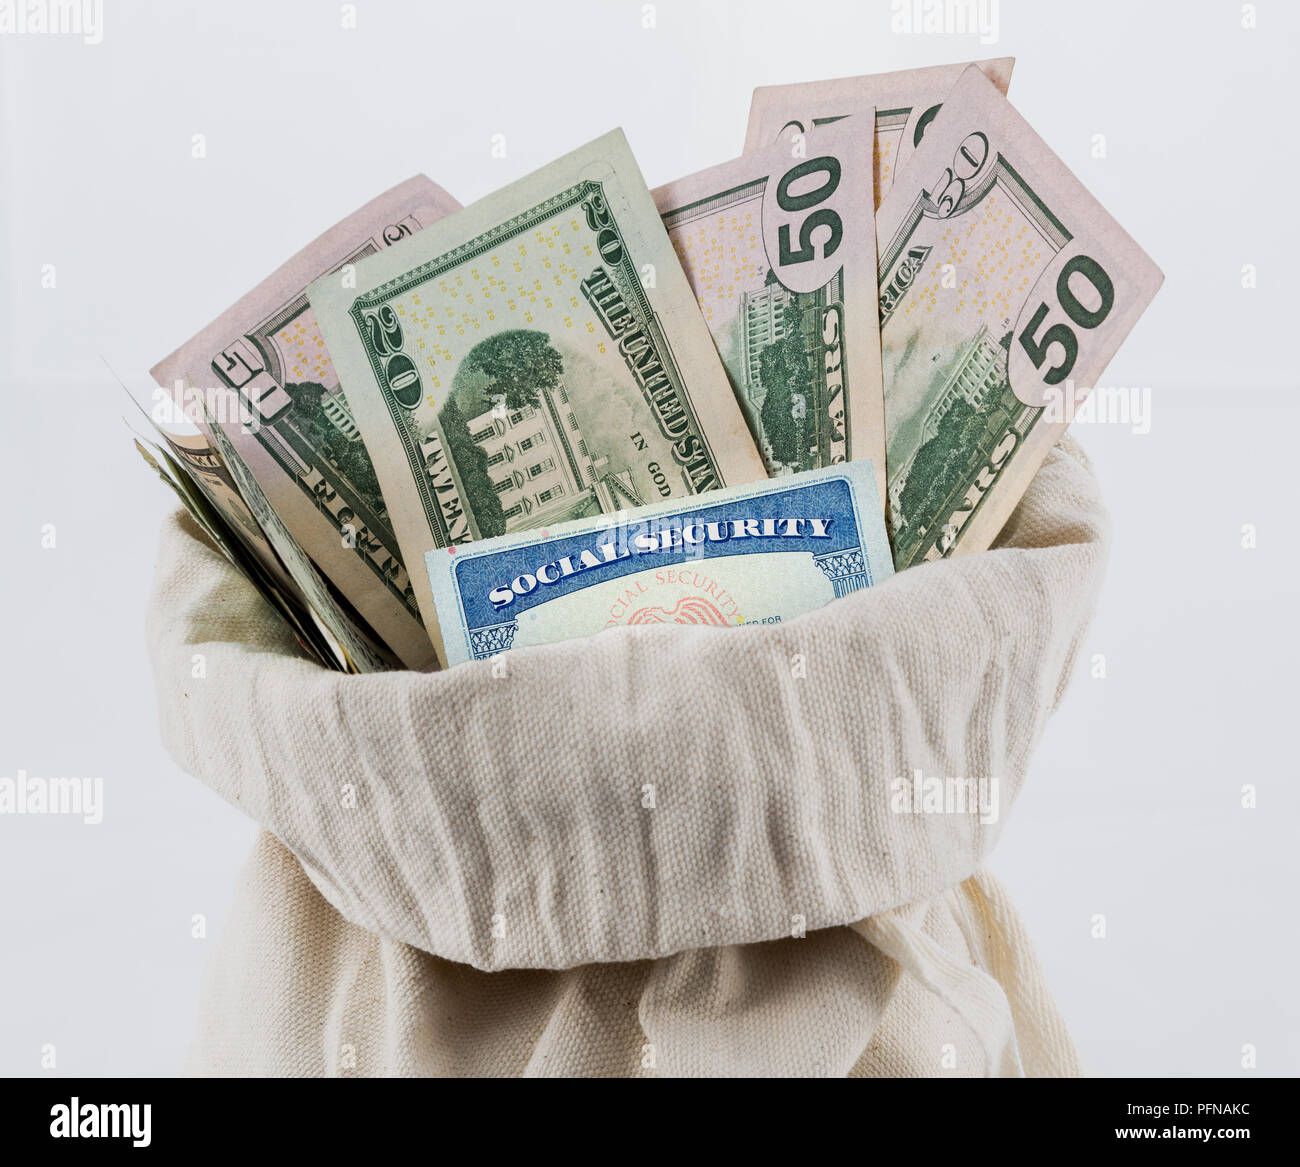 Many US dollar bills or notes in money bag with social security card Stock Photo